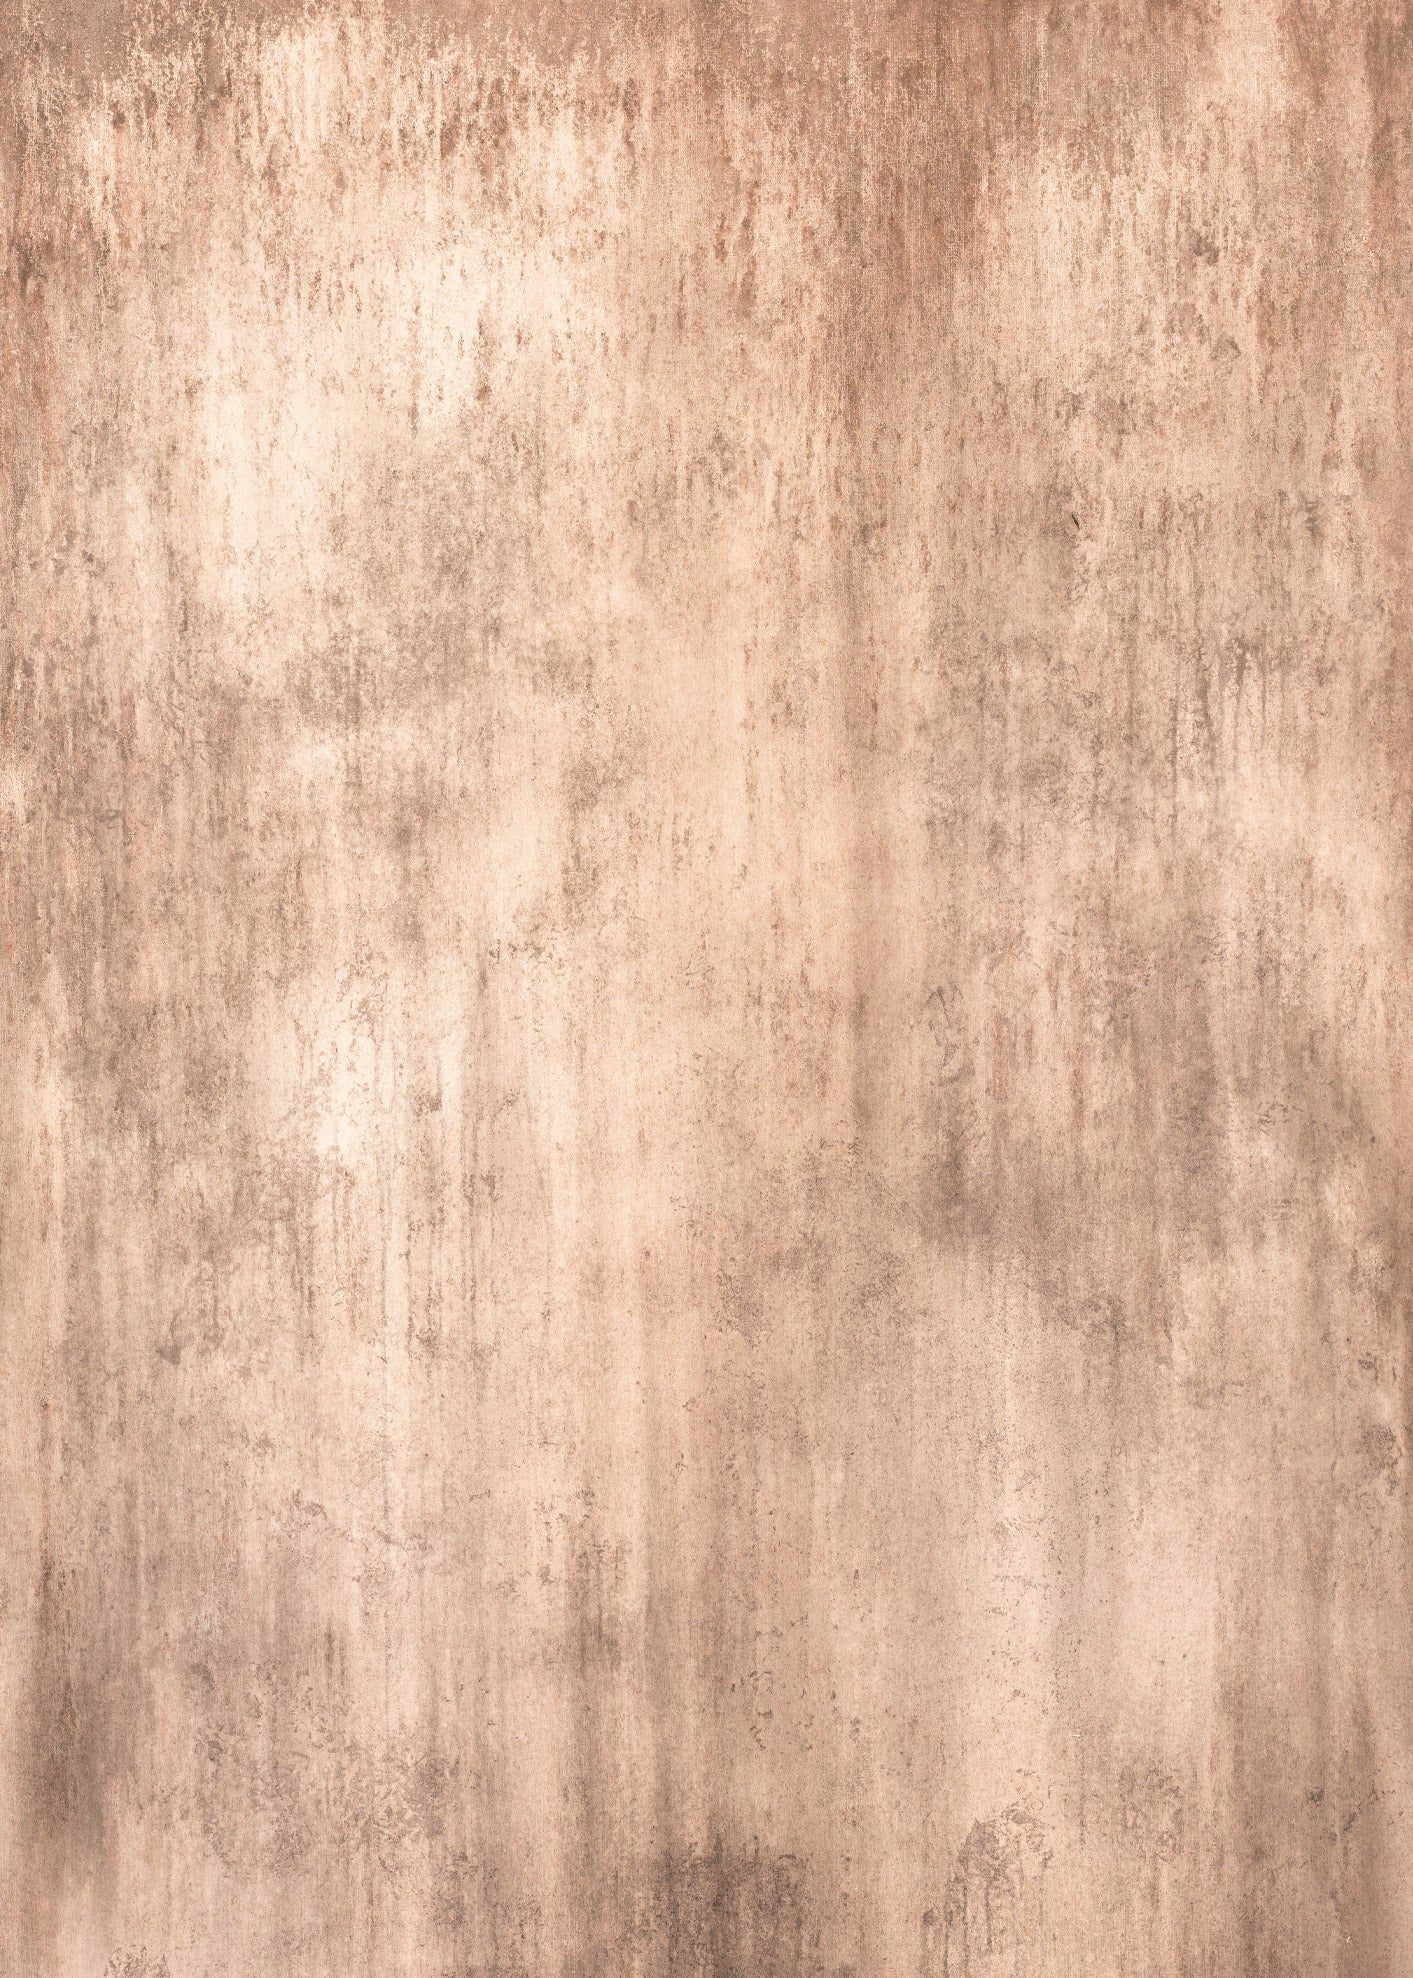 Brutal Pink Aged Concrete Canvas Backdrop by Photography Backdrop Club